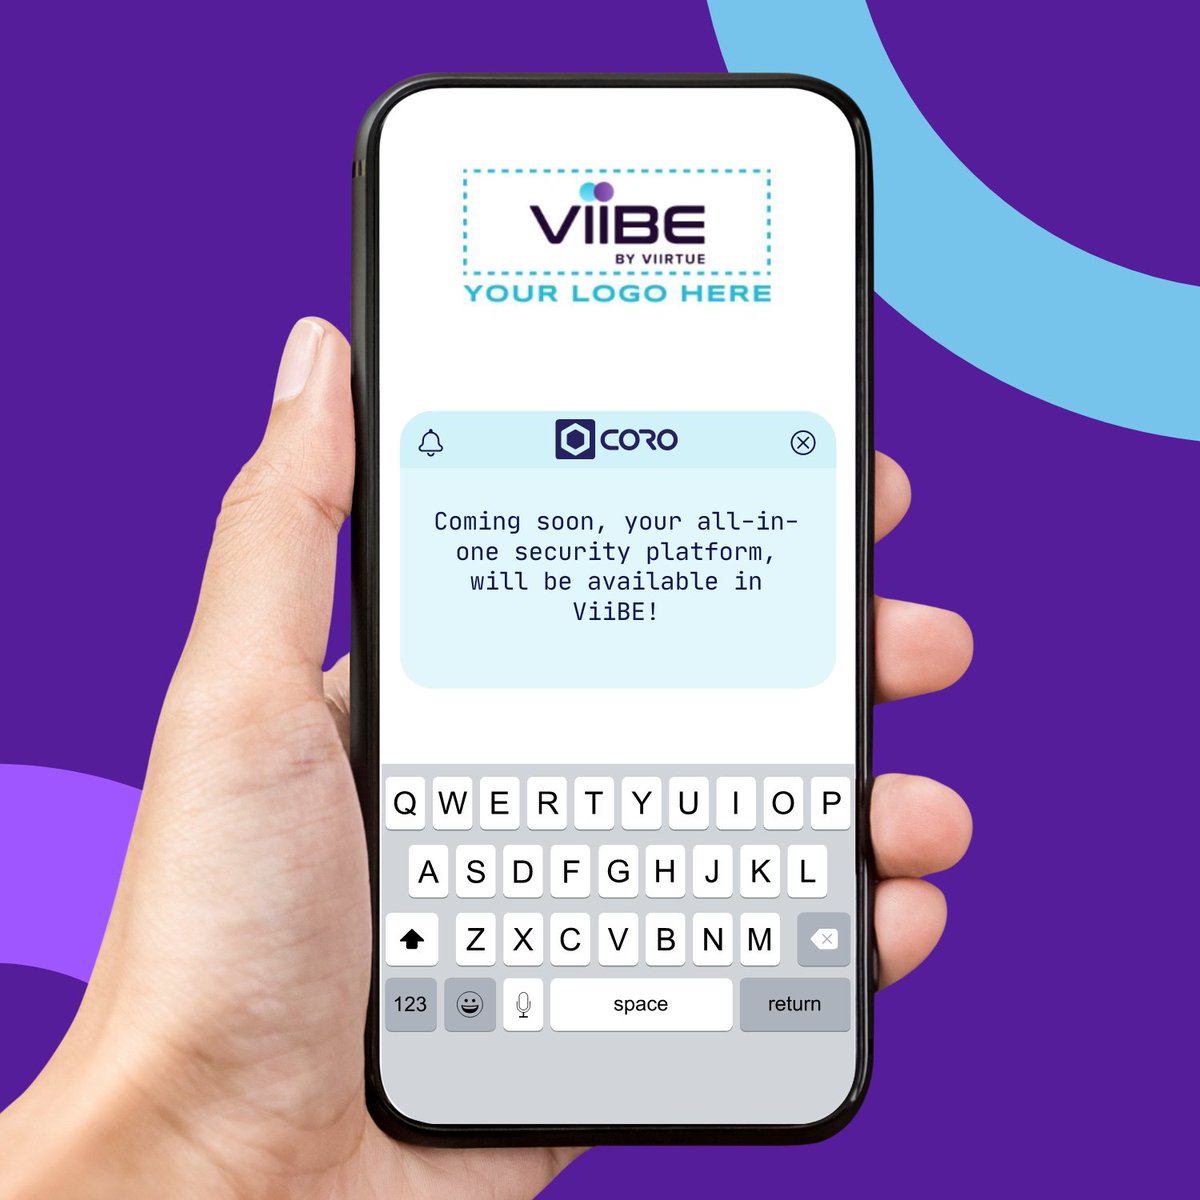 Is cybersecurity a cornerstone of your business strategy? Offering state-of-the-art cybersecurity solutions ensures you meet necessary compliance standards. Coming soon, your all-in-one security platform, will be available in ViiBE! 

#Cybersecurity #CommingtoViiBE #MSP